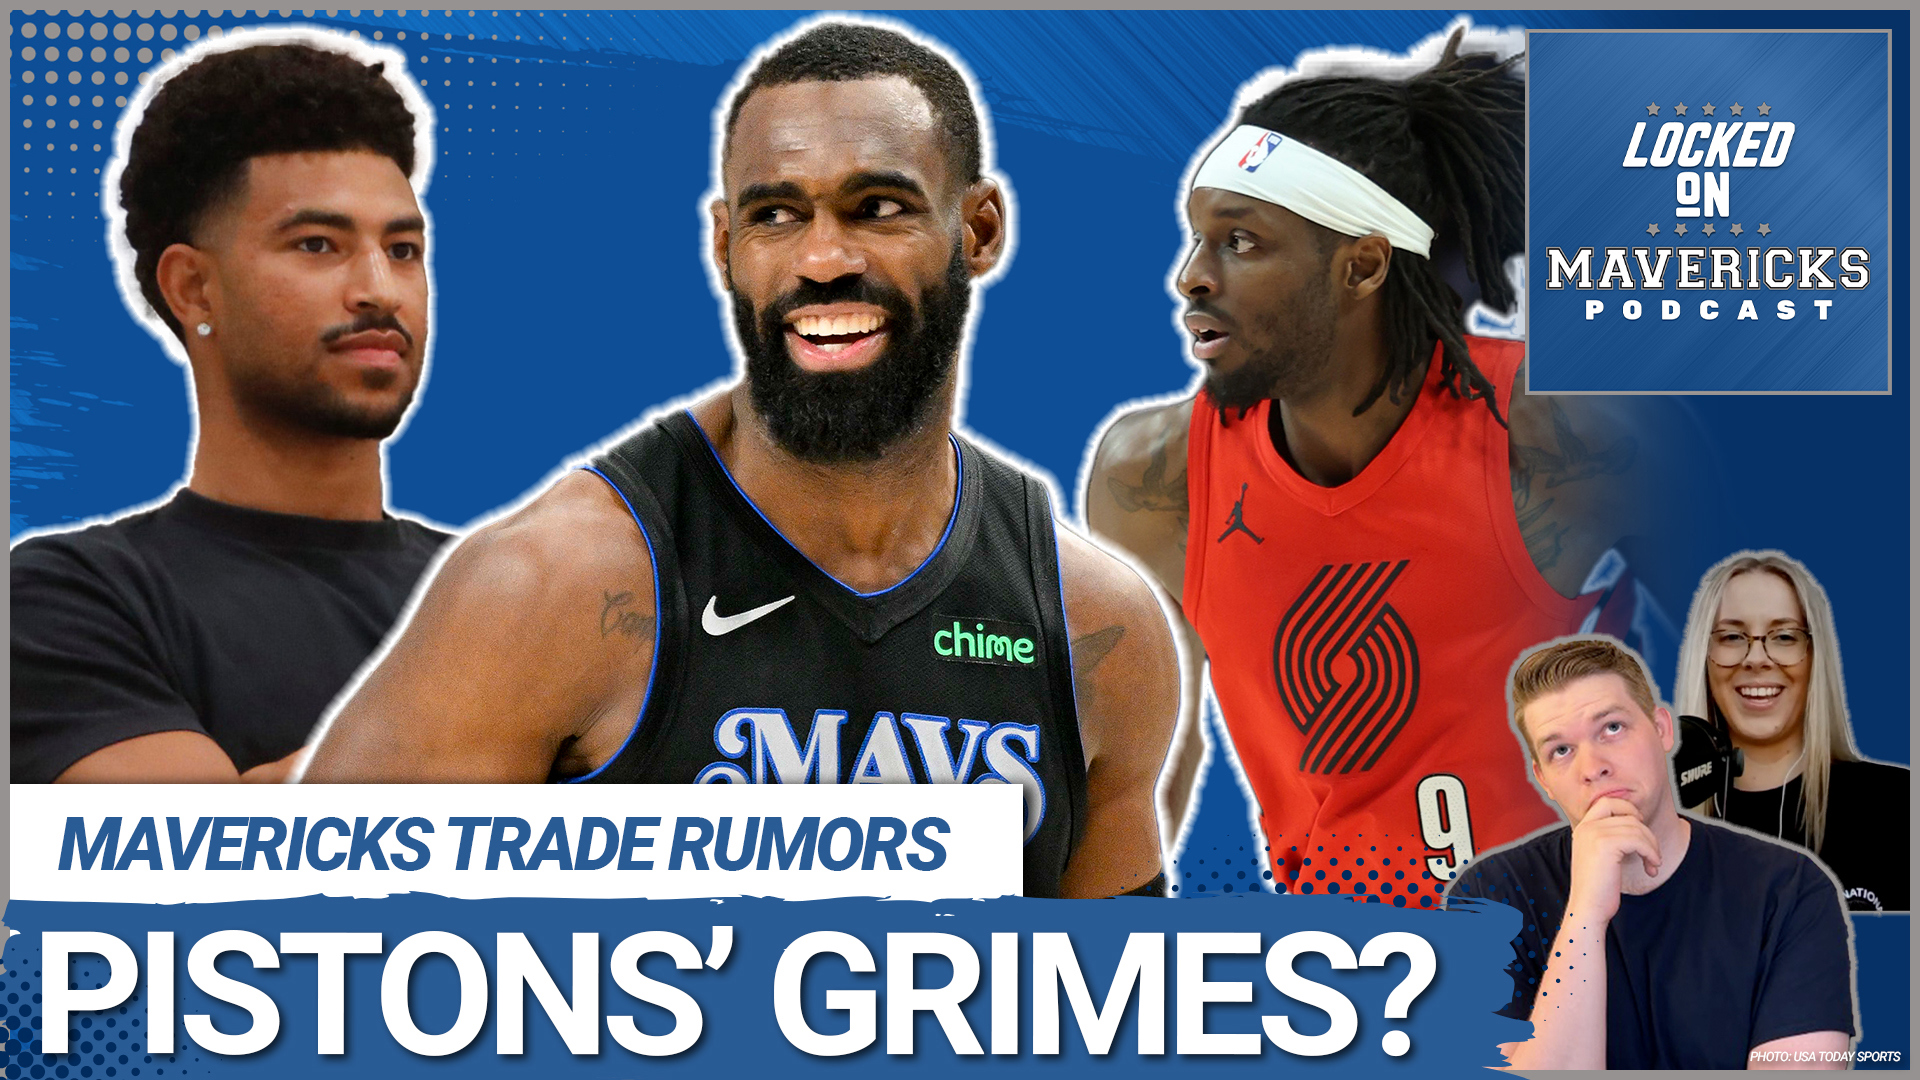 Nick Angstadt is joined by Lauren Gunn to discuss the Dallas Mavericks trade rumor with the Detroit Pistons to swap Tim Hardaway Jr. and Quentin Grimes.